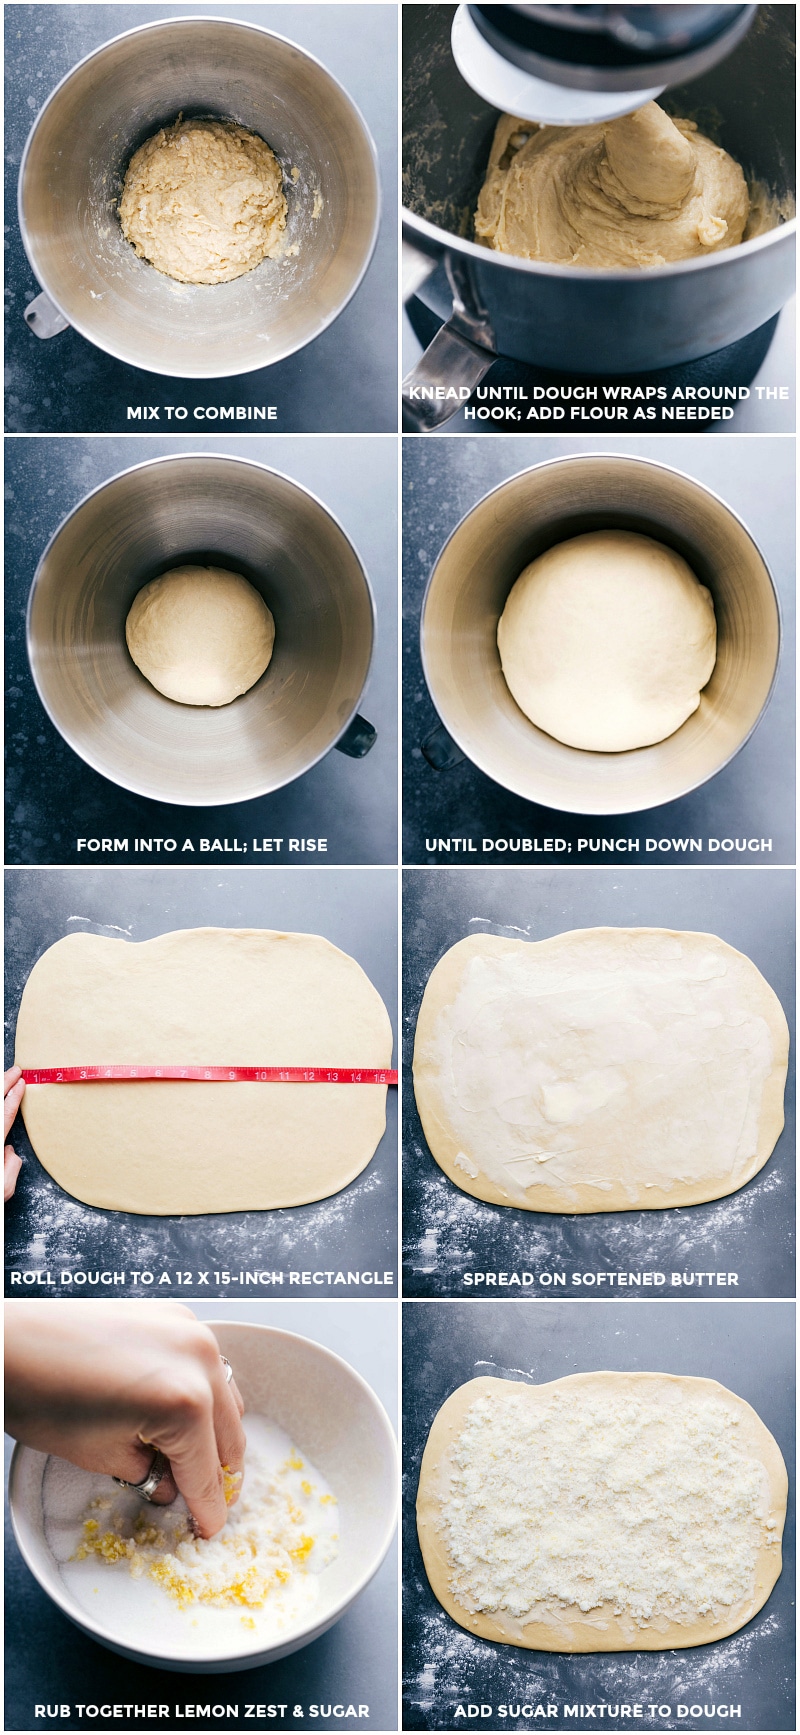 Process shots-- images of he dough being mixed together, rising, and being rolled out, and the sugar being spread over